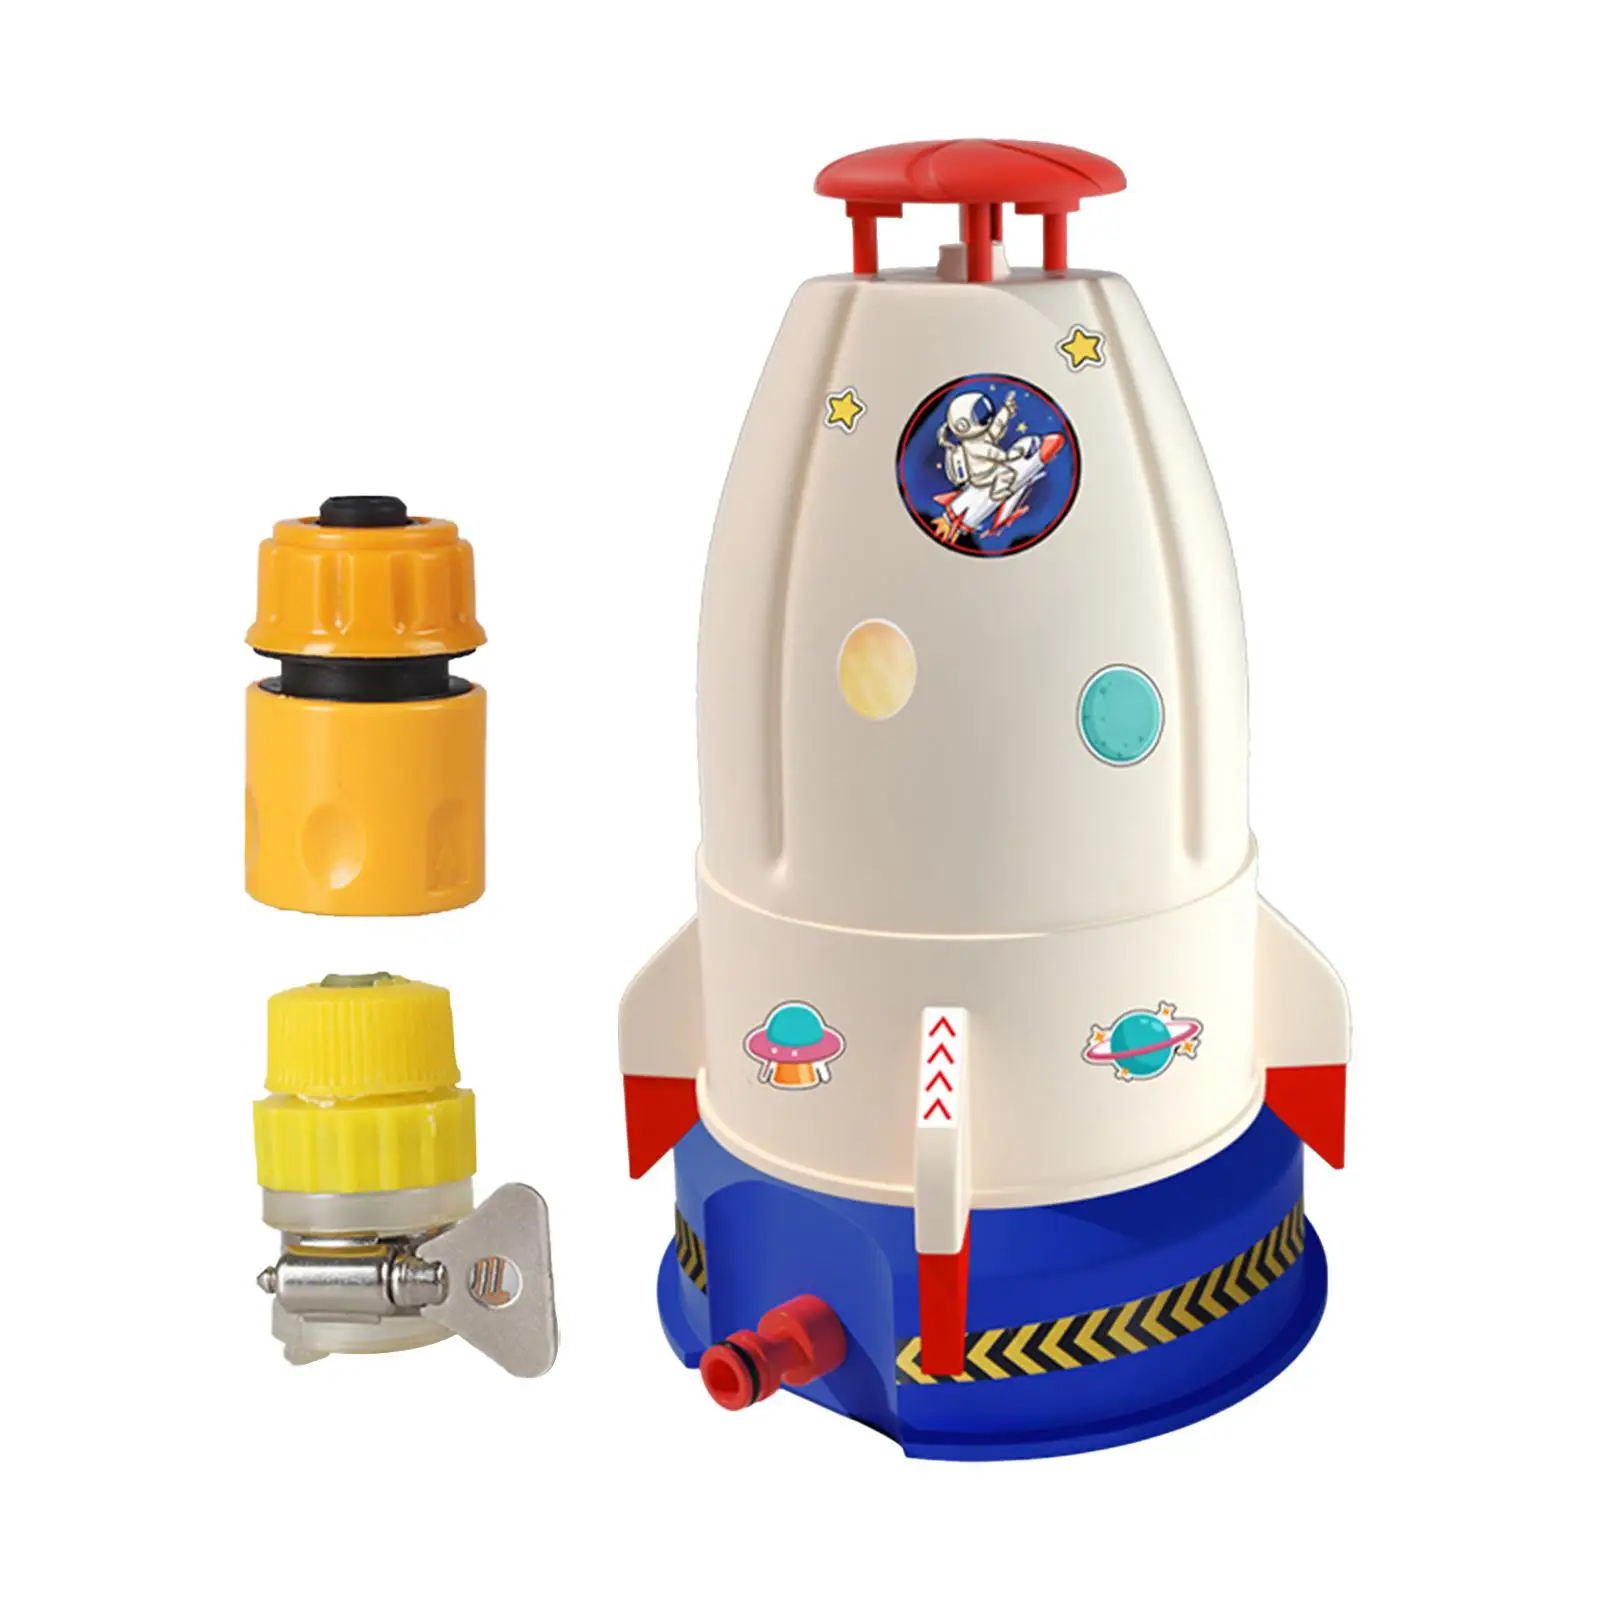 Rocket Sprinkler Outdoor Water Toy Summer Water Sprayer Toy for Yard Ages 3+